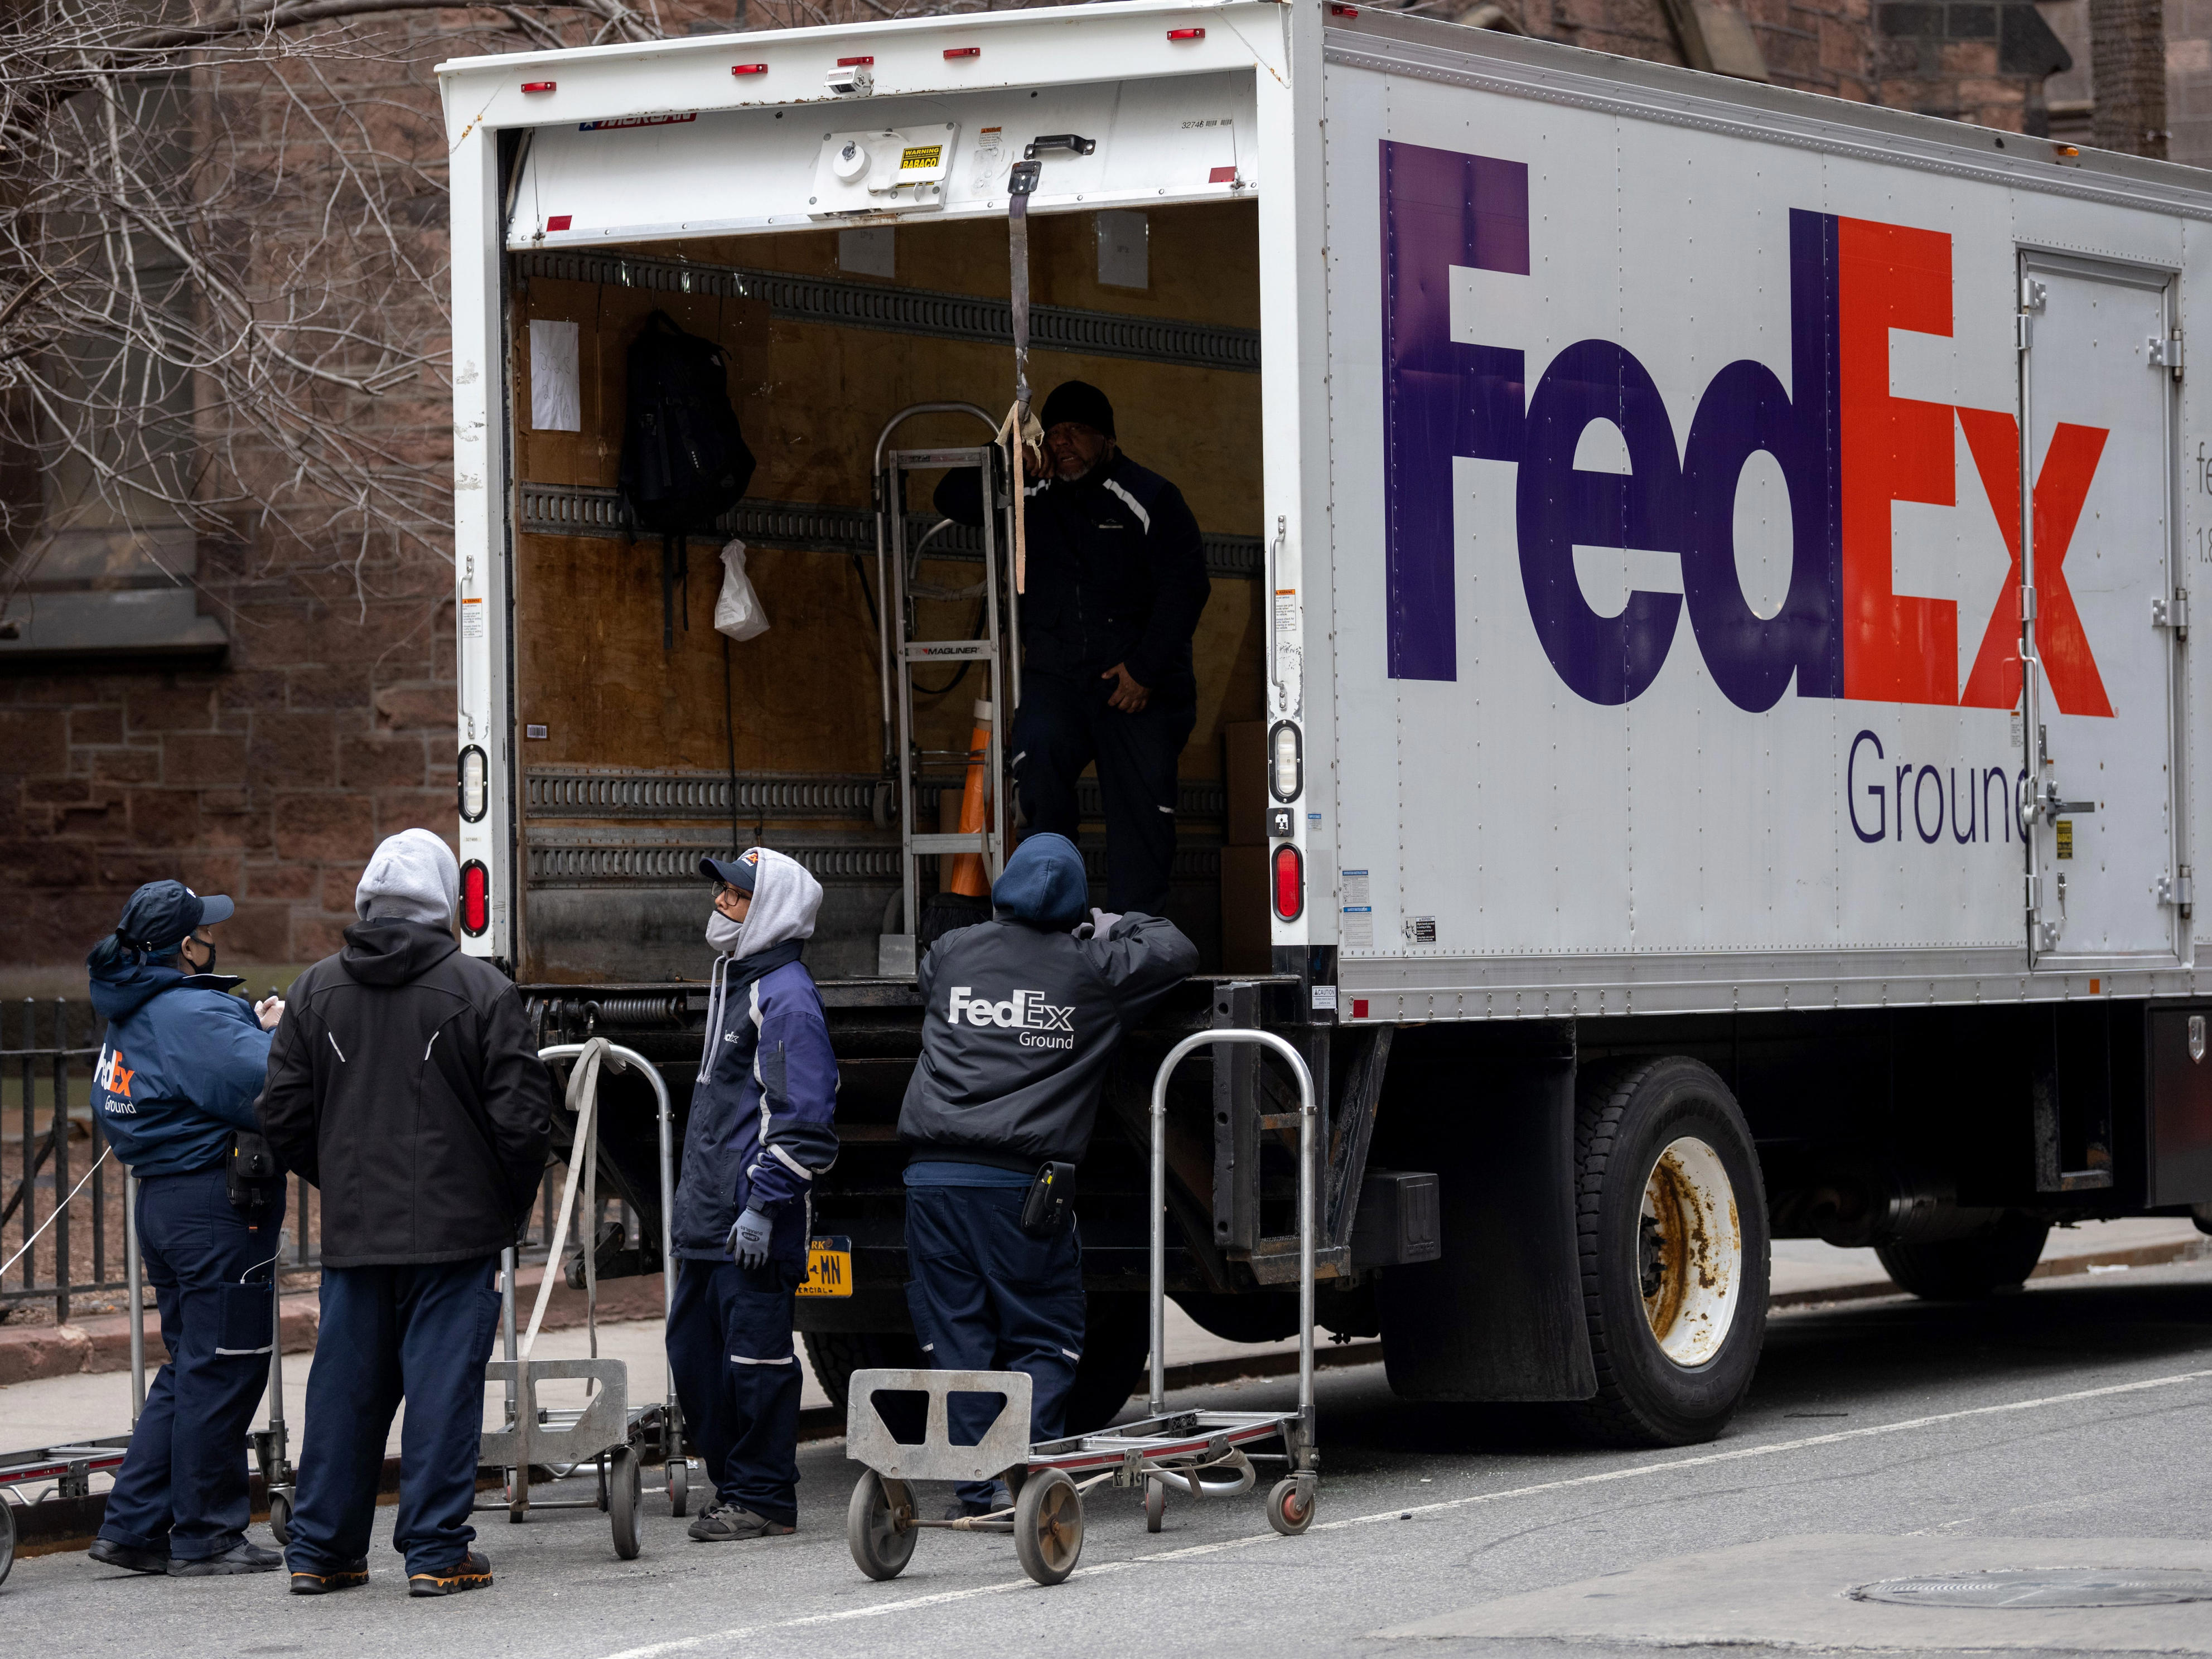 <p>FedEx informed staffers on Feb. 1 it plans to slash more than 10% of managers in an effort to reduce costs.  </p><p>"This process is critical to ensure we remain competitive in a rapidly changing environment, and it requires some difficult decisions," CEO Raj Subramaniam wrote in a letter to staff, which was shared with <a href="https://www.businessinsider.com/fedex-layoffs-job-cuts-management-roles-costs-ceo-memo-2023-2">Insider's Emma Cosgrove</a>. </p><p>While the exact number of employees impacted was not specified, a FedEx spokesperson told Insider that since June 2022 the company has reduced its workforce by more than 12,000 staffers through "headcount management initiatives." </p><p>"We will continue responsible headcount management throughout our transformation," the spokesperson said. </p>